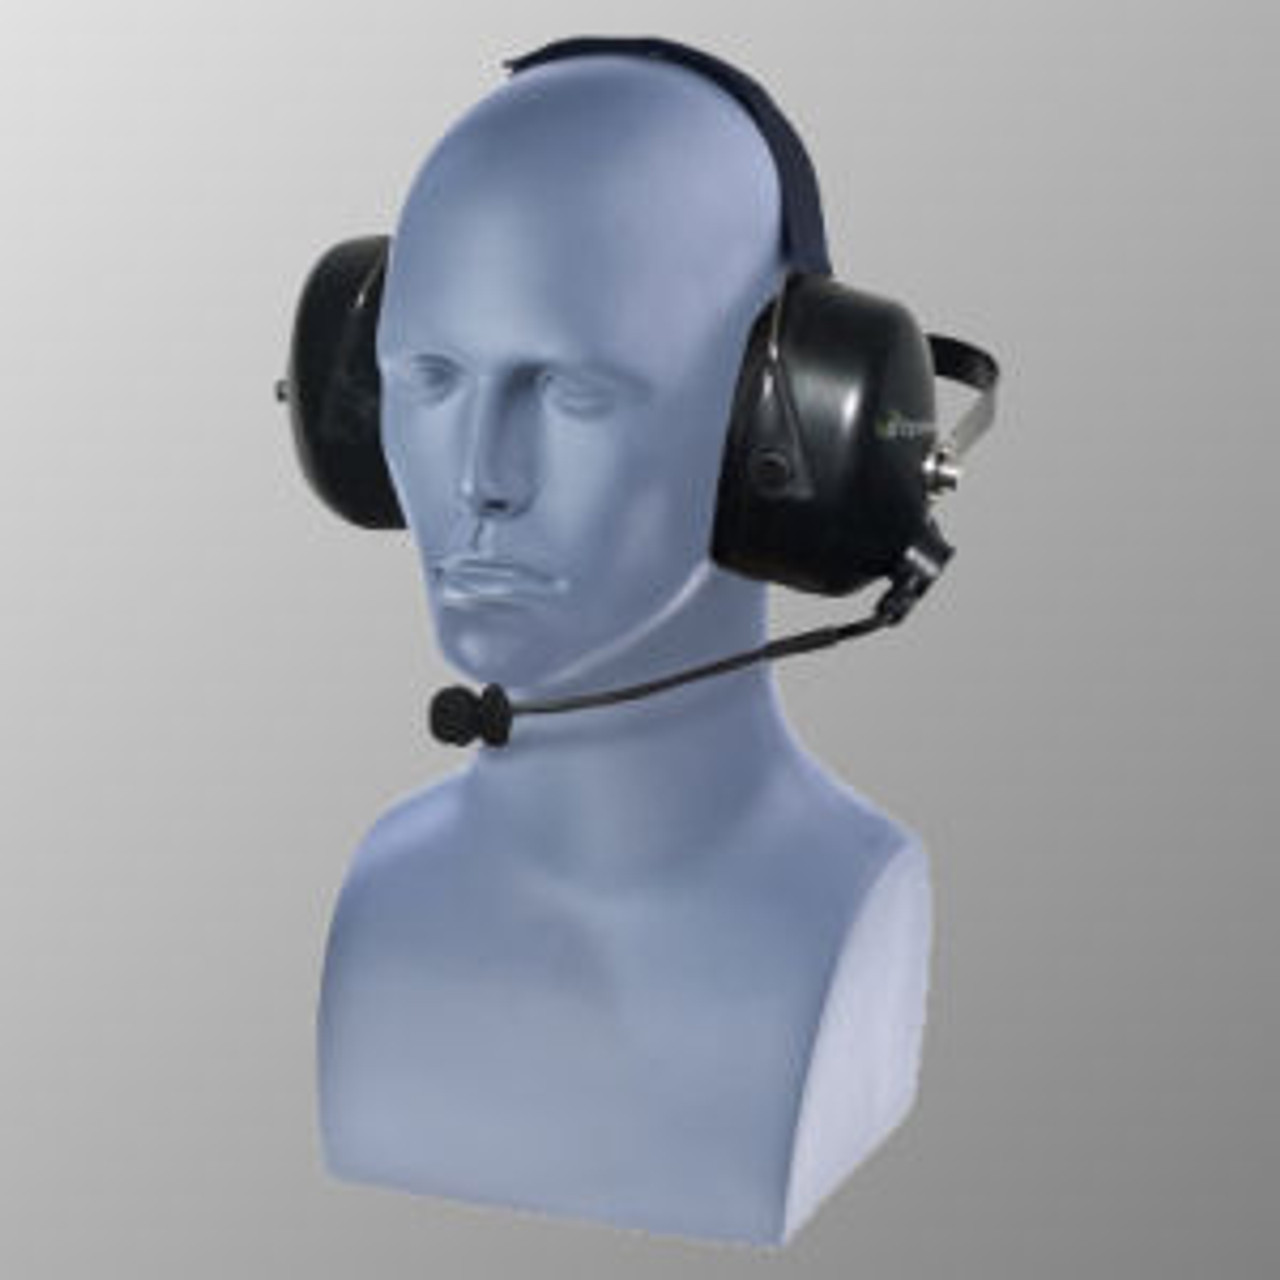 Harris P5470 Noise Canceling Double Muff Behind The Head Headset